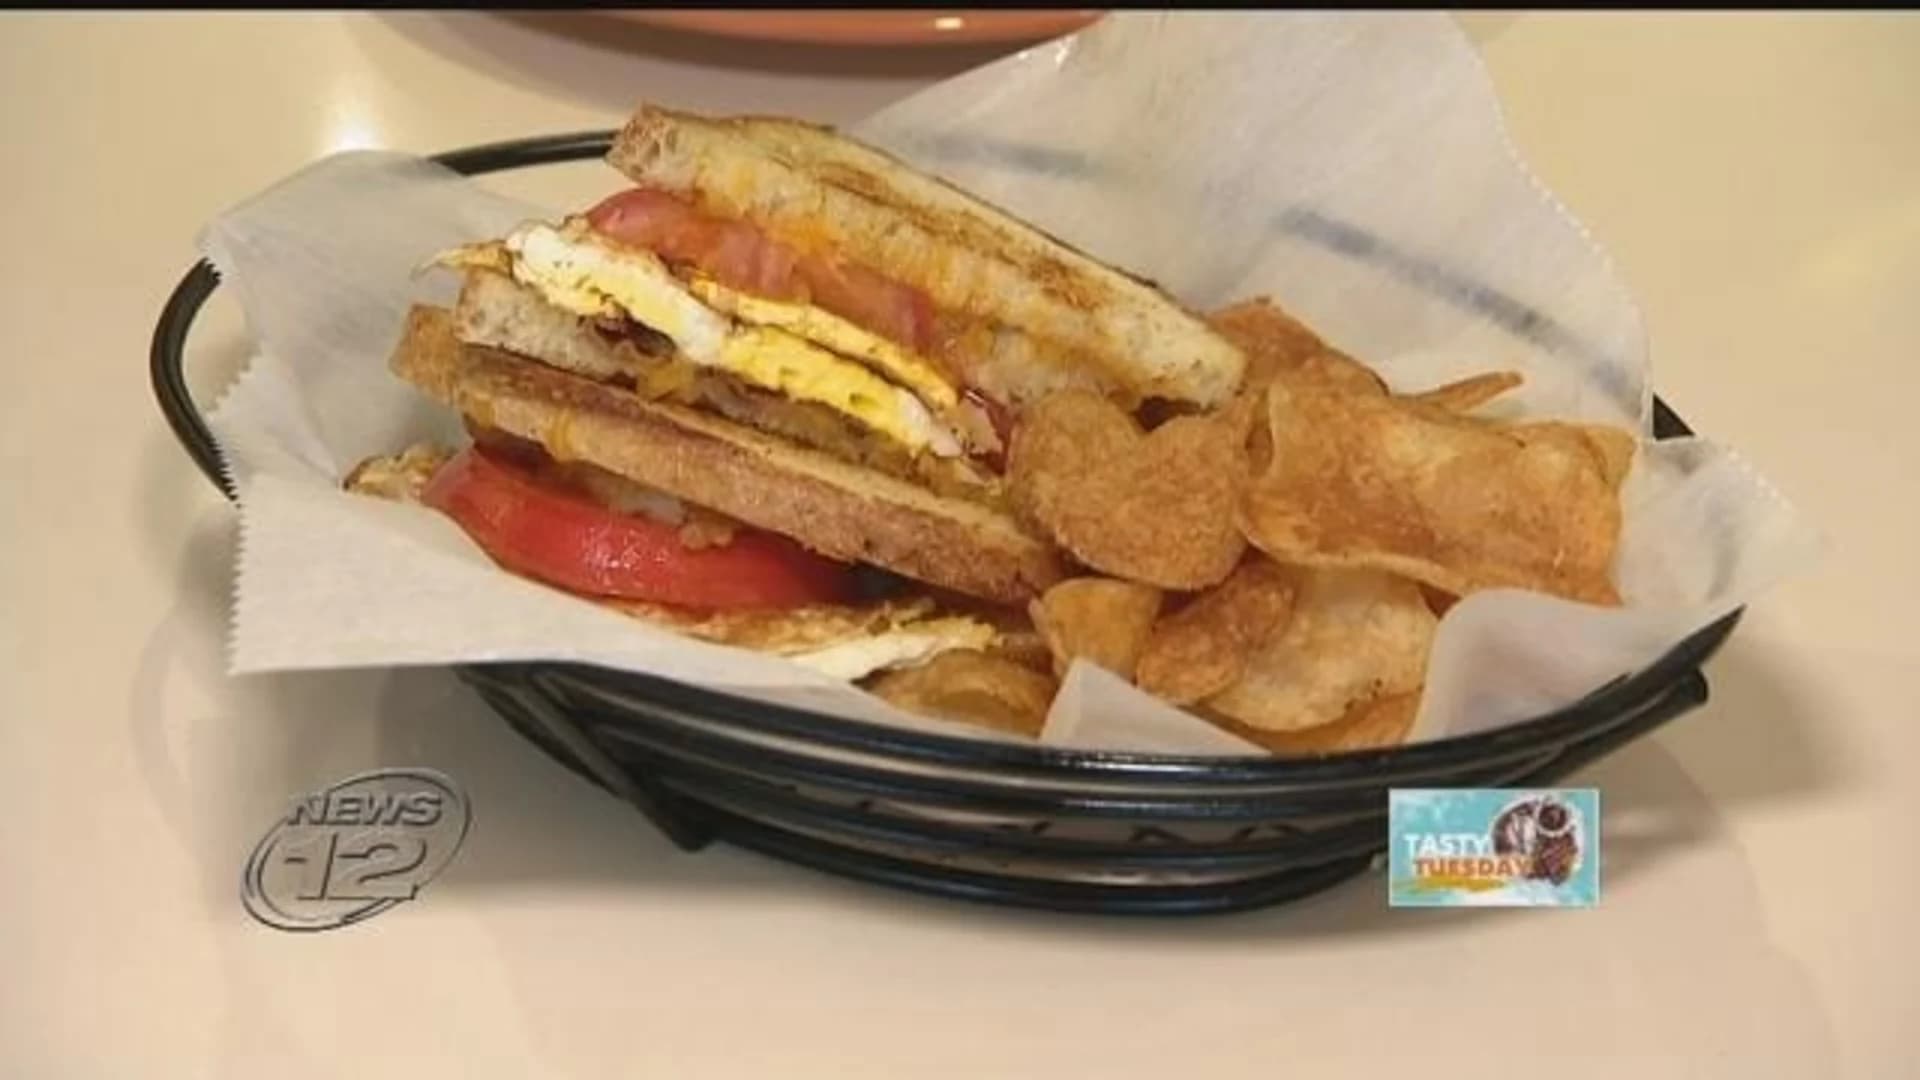 Tasty Tuesday: Grilled cheese at Mac & Melts